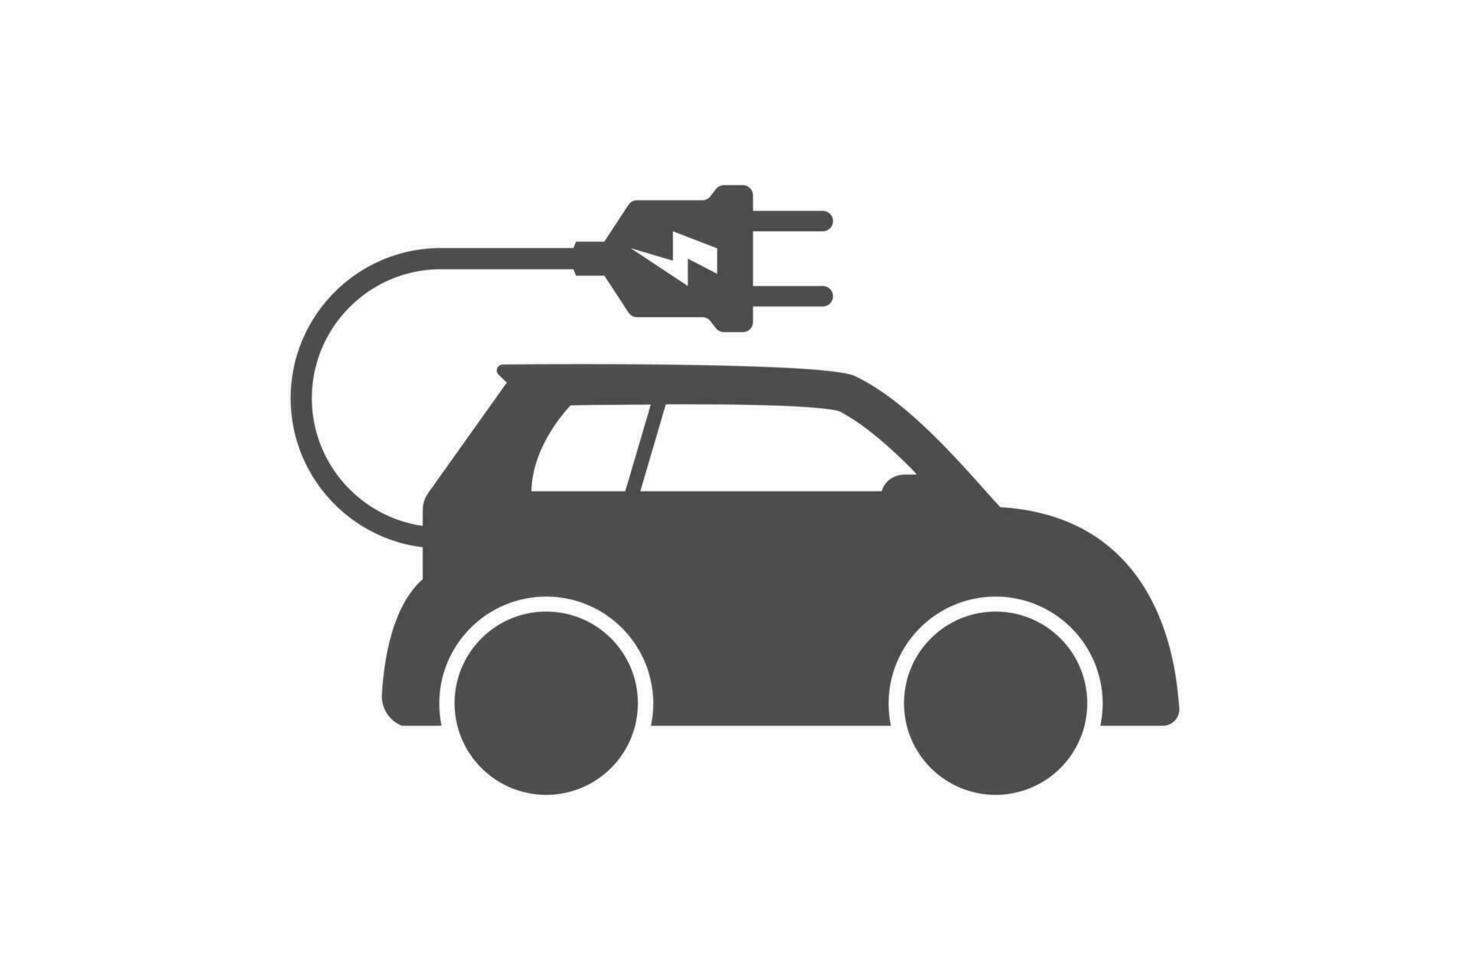 Electric car icon vector design illustration, environment friendly and future vehicle concept